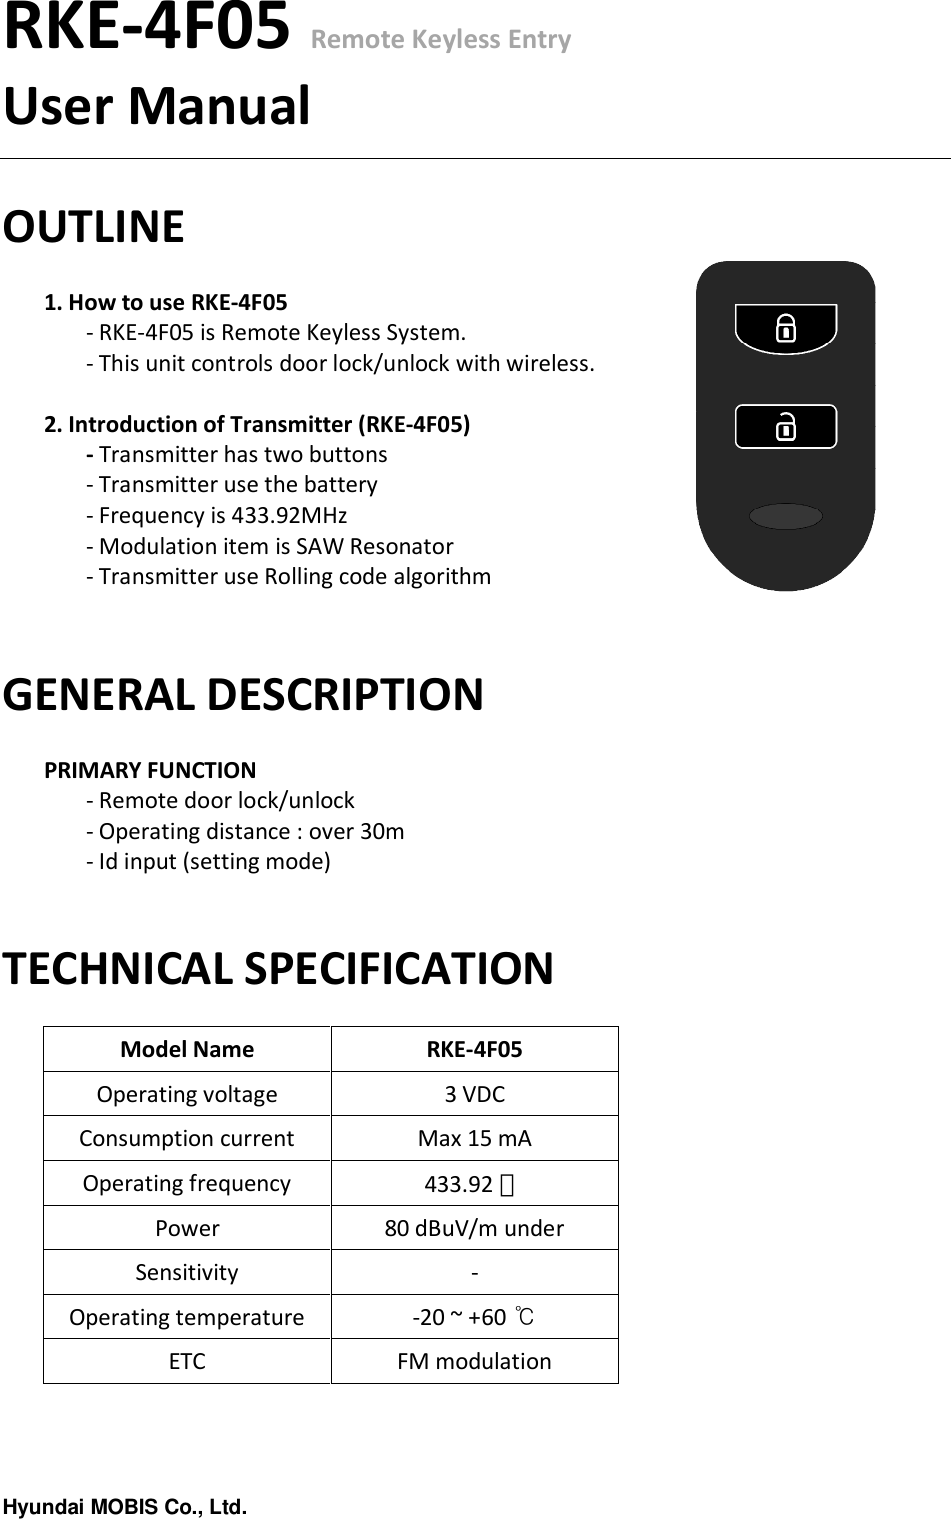 Hyundai MOBIS Co., Ltd.RKE-4F05 Remote Keyless EntryUser ManualOUTLINE1. How to use RKE-4F05- RKE-4F05 is Remote Keyless System.- This unit controls door lock/unlock with wireless.2. Introduction of Transmitter (RKE-4F05)-Transmitter has two buttons- Transmitter use the battery- Frequency is 433.92MHz- Modulation item is SAW Resonator- Transmitter use Rolling code algorithmGENERAL DESCRIPTIONPRIMARY FUNCTION- Remote door lock/unlock- Operating distance : over 30m- Id input (setting mode)TECHNICAL SPECIFICATIONModel Name RKE-4F05Operating voltage 3 VDCConsumption current Max 15 mAOperating frequency 433.92 ㎒Power 80 dBuV/m underSensitivity -Operating temperature -20 ~ +60 ℃ETC FM modulation